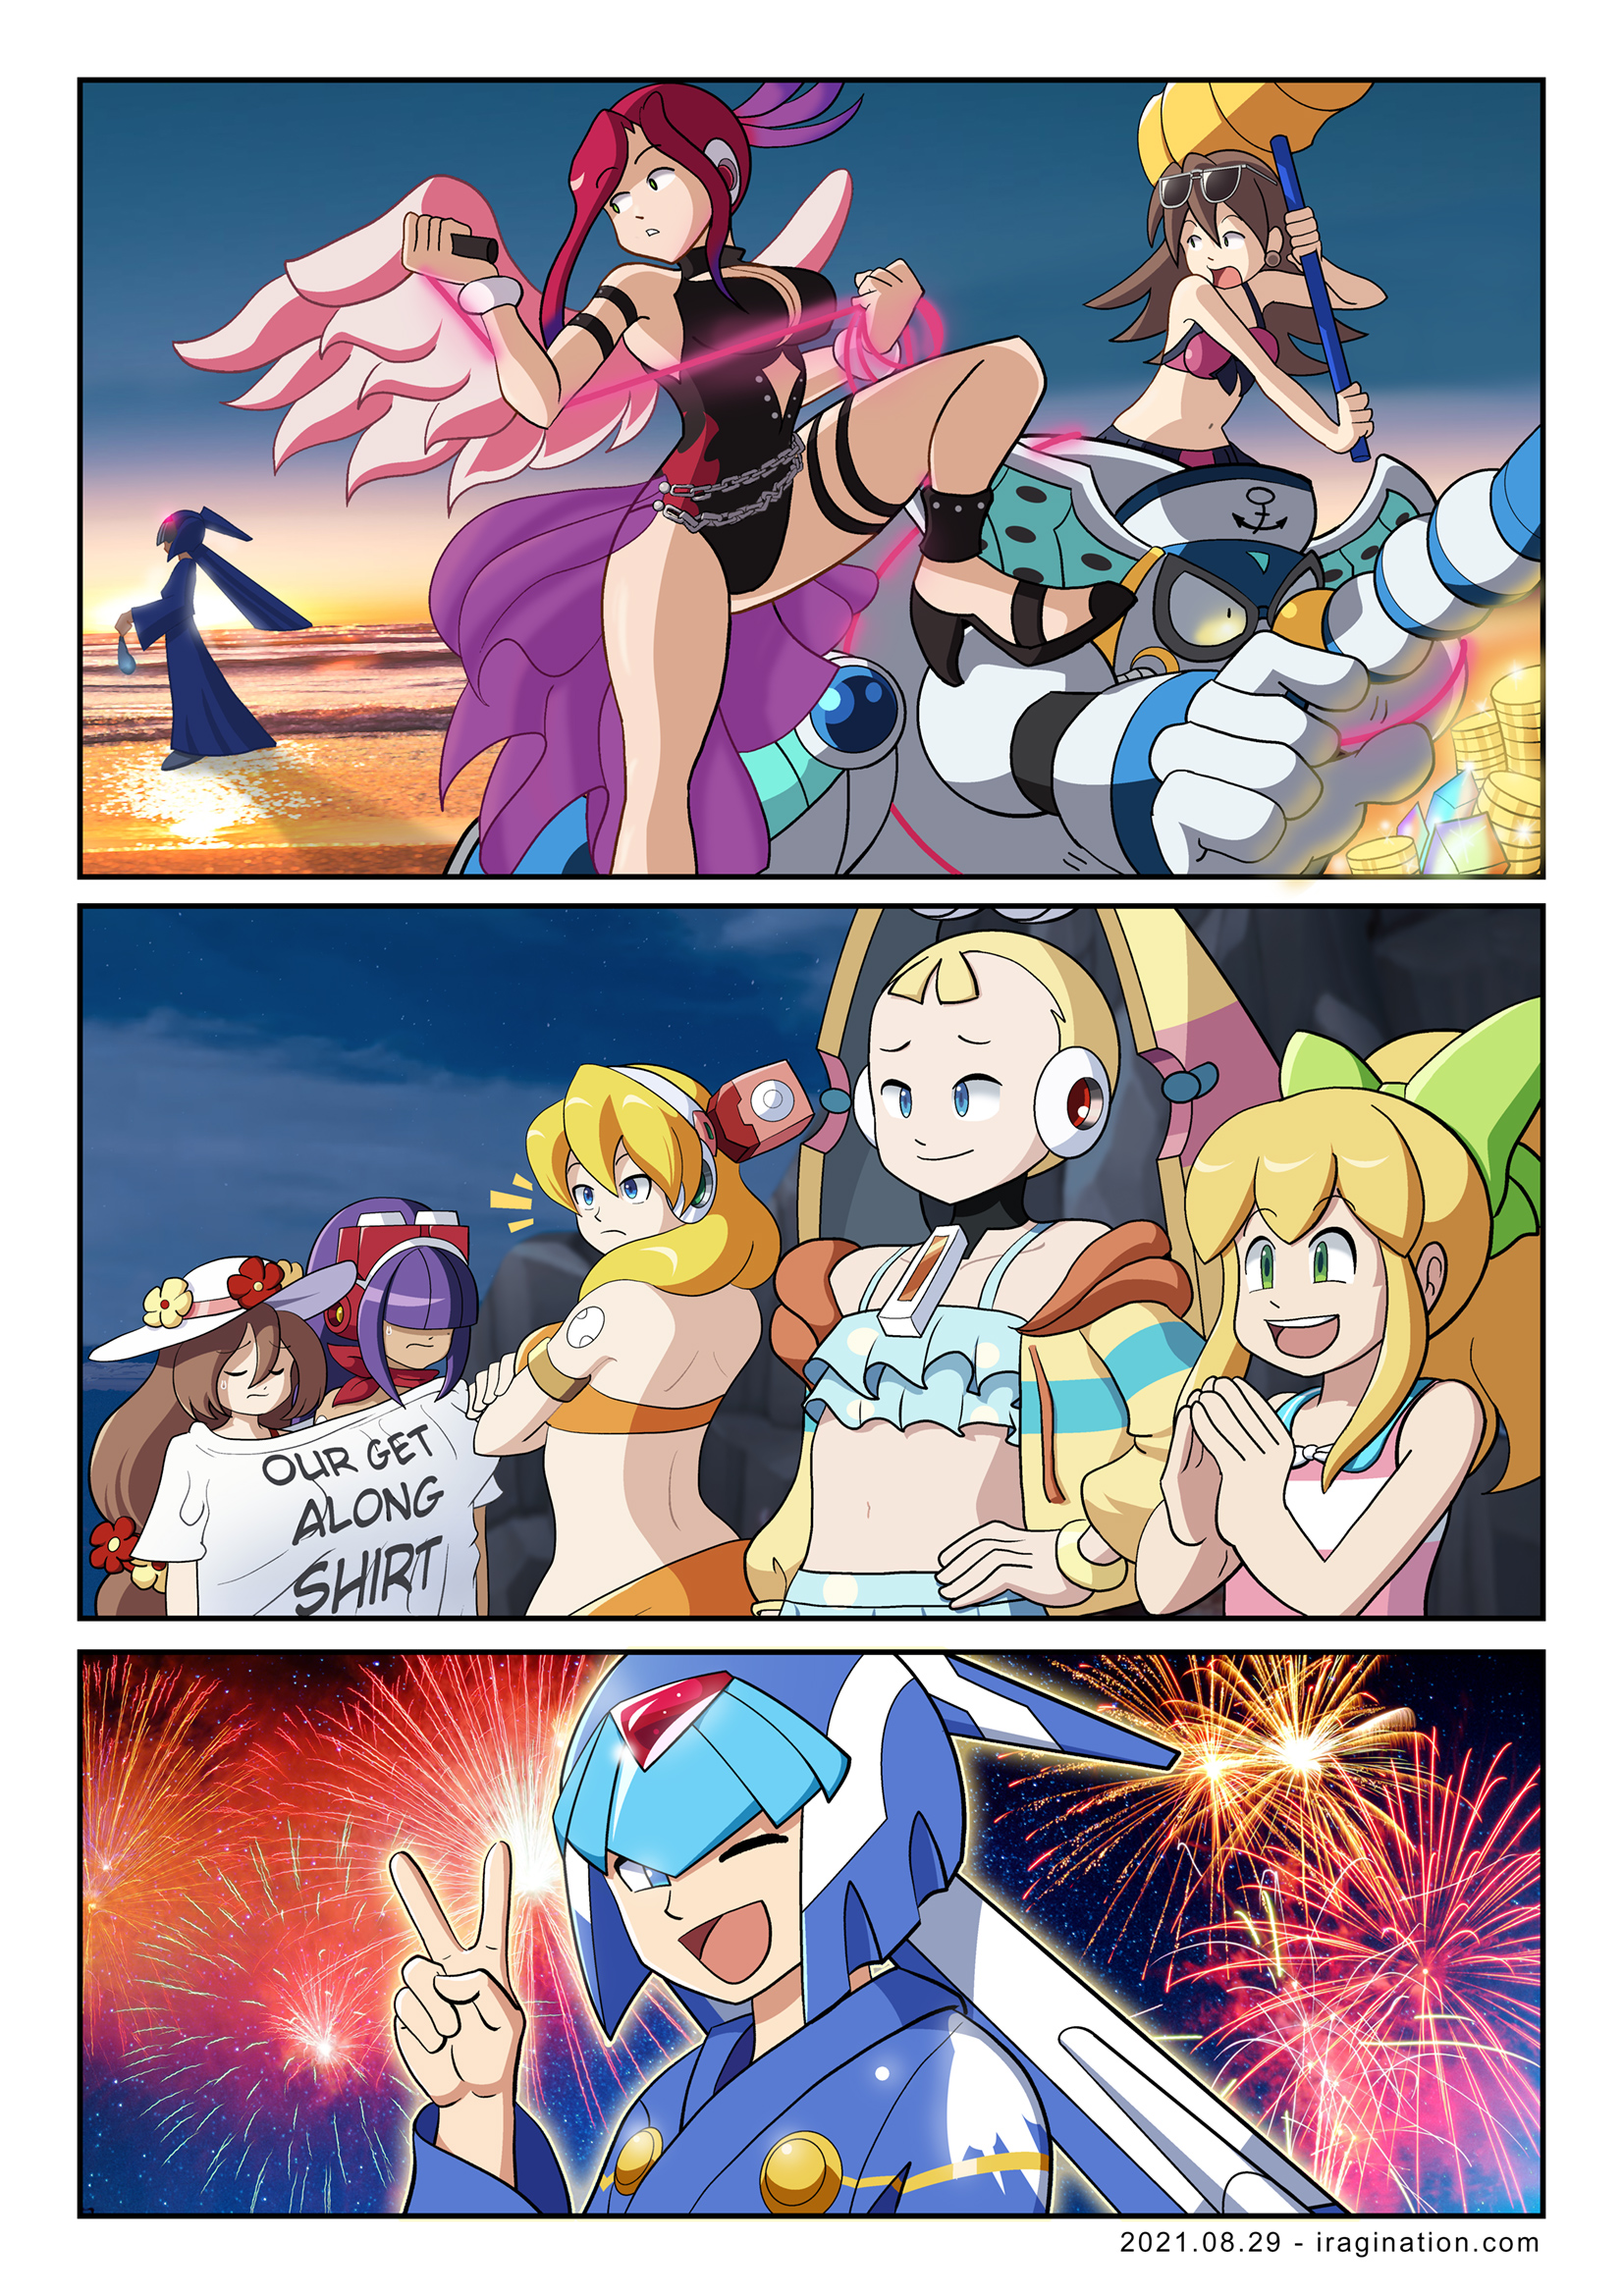 Summer Vacation / Fireworks and Lantern Festival 2021- Rockman X DiVE
I missed many Rockman X DiVE events during the summer. They showed up so quickly. [url=https://www.iragination.com/illust/displayimage.php?pid=521]Like last year[/url], at least I managed to make this illustration with some memorable moments. Overall, the game has delivered a lot of varied and interesting content.

With so many characters, this was a very challenging piece. But it was fun to draw and an excuse to test some new techniques.

[b]References[/b]
[url=https://www.facebook.com/CAPCOM.RXD/videos/879402822649085]Summer Treasure Hunt[/url]

[url=https://www.facebook.com/CAPCOM.RXD/videos/964662204315839]Swimsuit Pallette[/url]

[url=https://www.facebook.com/CAPCOM.RXD/posts/783102925719132]Swimsuit Roll â€“ Revamped version[/url]

[url=https://www.facebook.com/CAPCOM.RXD/posts/807850213244403]Festive Leviathan[/url]

[b]Photos[/b]
[url=https://www.pexels.com/photo/scenic-view-of-ocean-during-sunset-1032650/]1[/url] [url=https://www.pexels.com/photo/plants-under-starry-sky-355887/]2[/url] [url=https://www.pexels.com/photo/fireworks-photo-634694/]3[/url] [url=https://www.pexels.com/photo/light-red-new-year-s-eve-colorful-33253/]4[/url]

Keywords: ferham Tron_Bonne leviathan flame_mammoth iris layer alia pallette roll